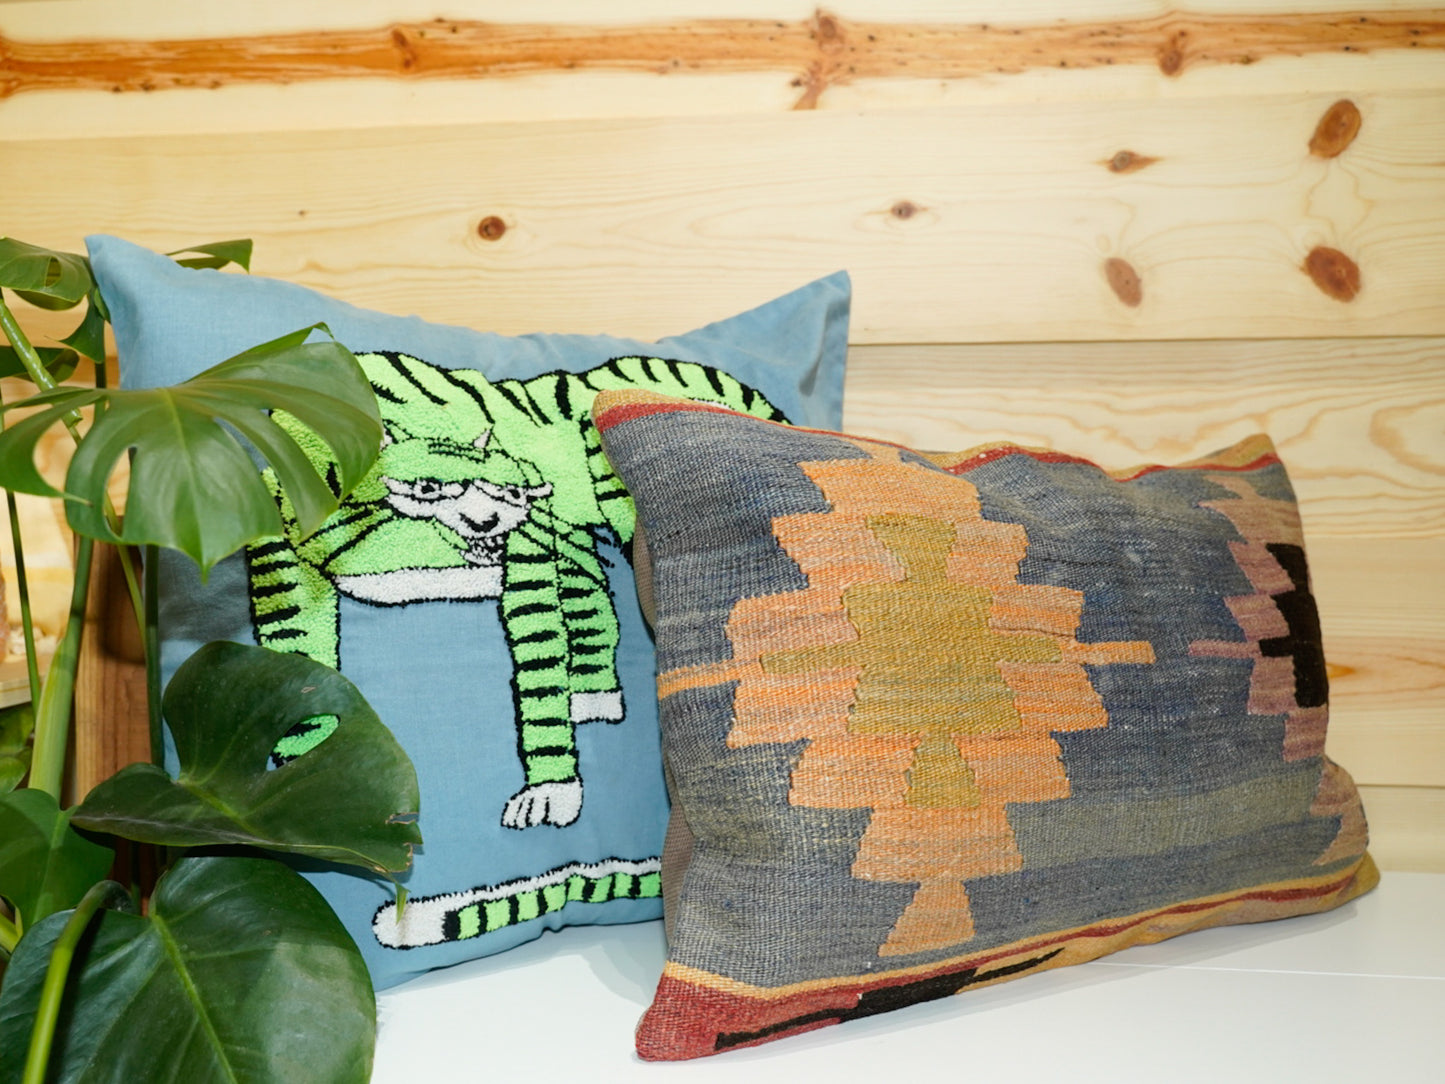 Khun Road Hand Crafted Mongolian Tiger Pillows - Misc Colors